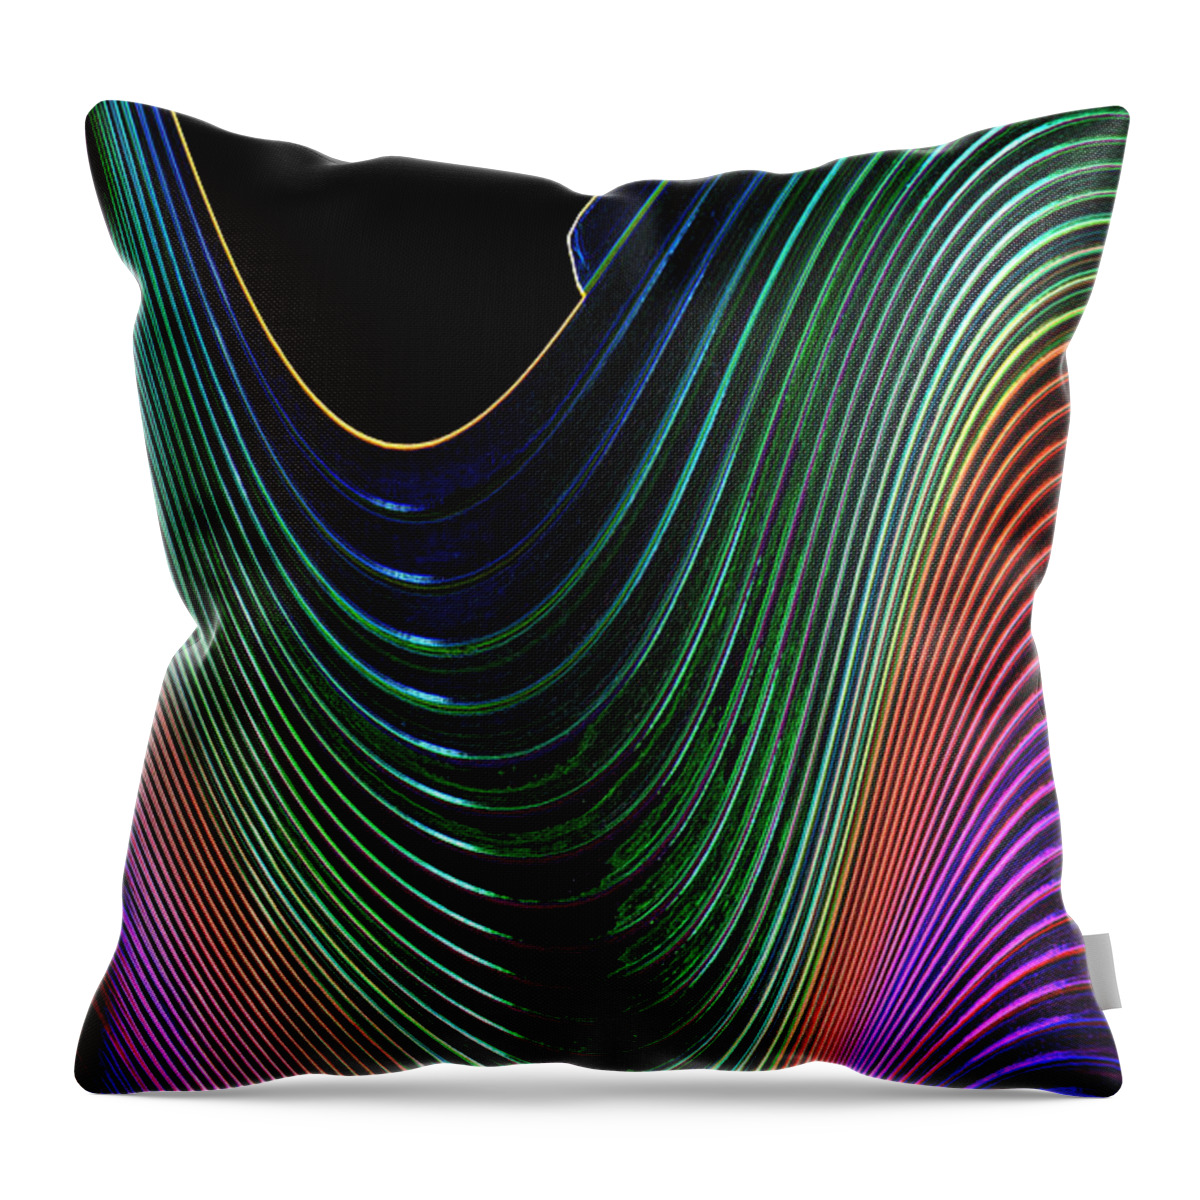 Neon Throw Pillow featuring the digital art Neon Slinky by Wendy Wilton